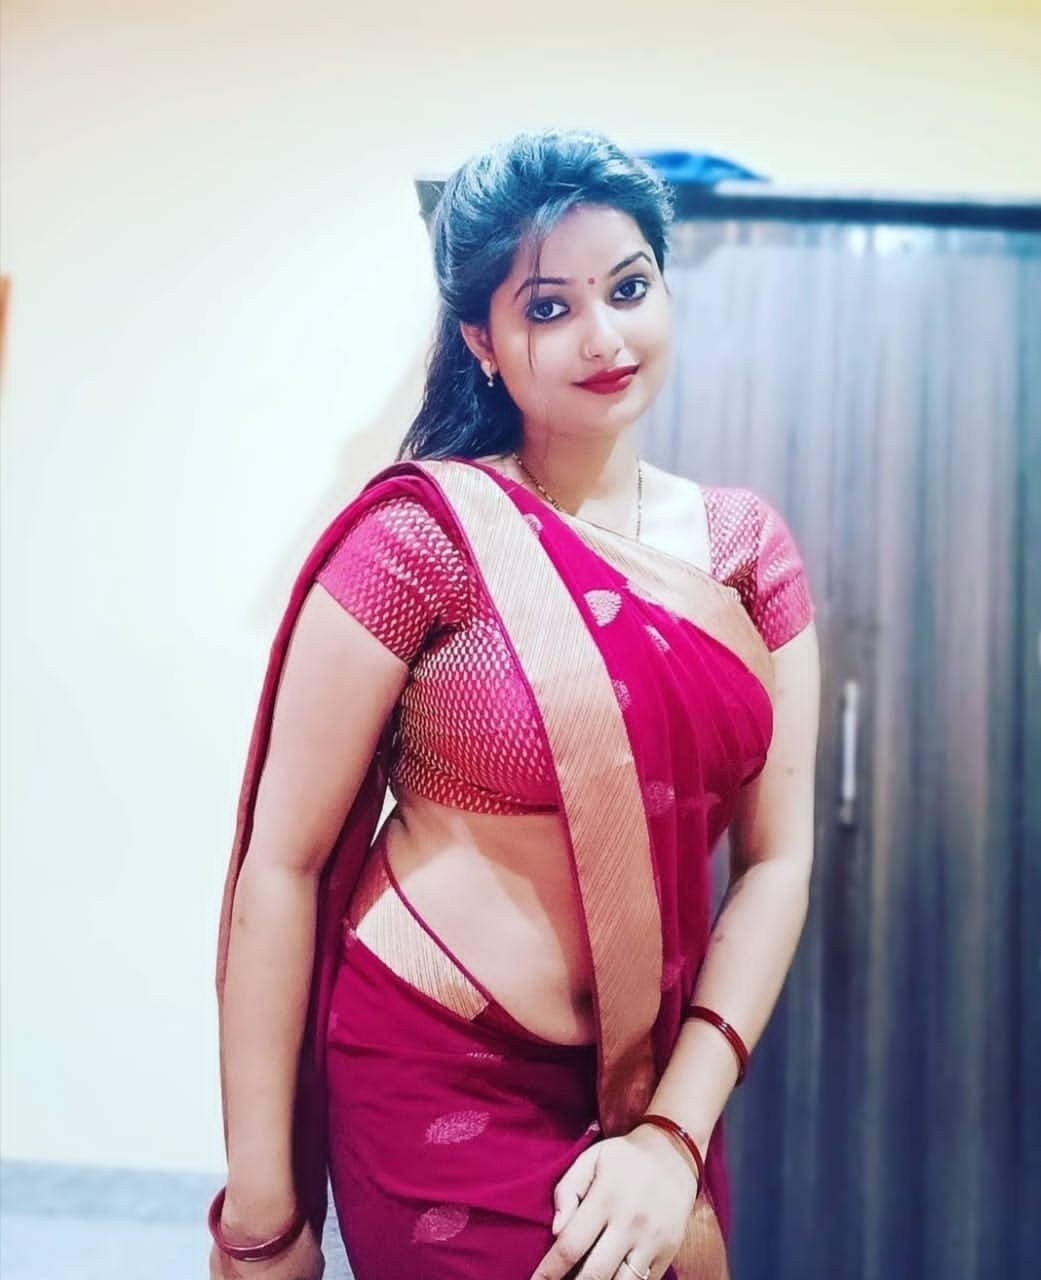 Wagholi 👉Bast call girls with hotel rooms safe secure and rooms ♈